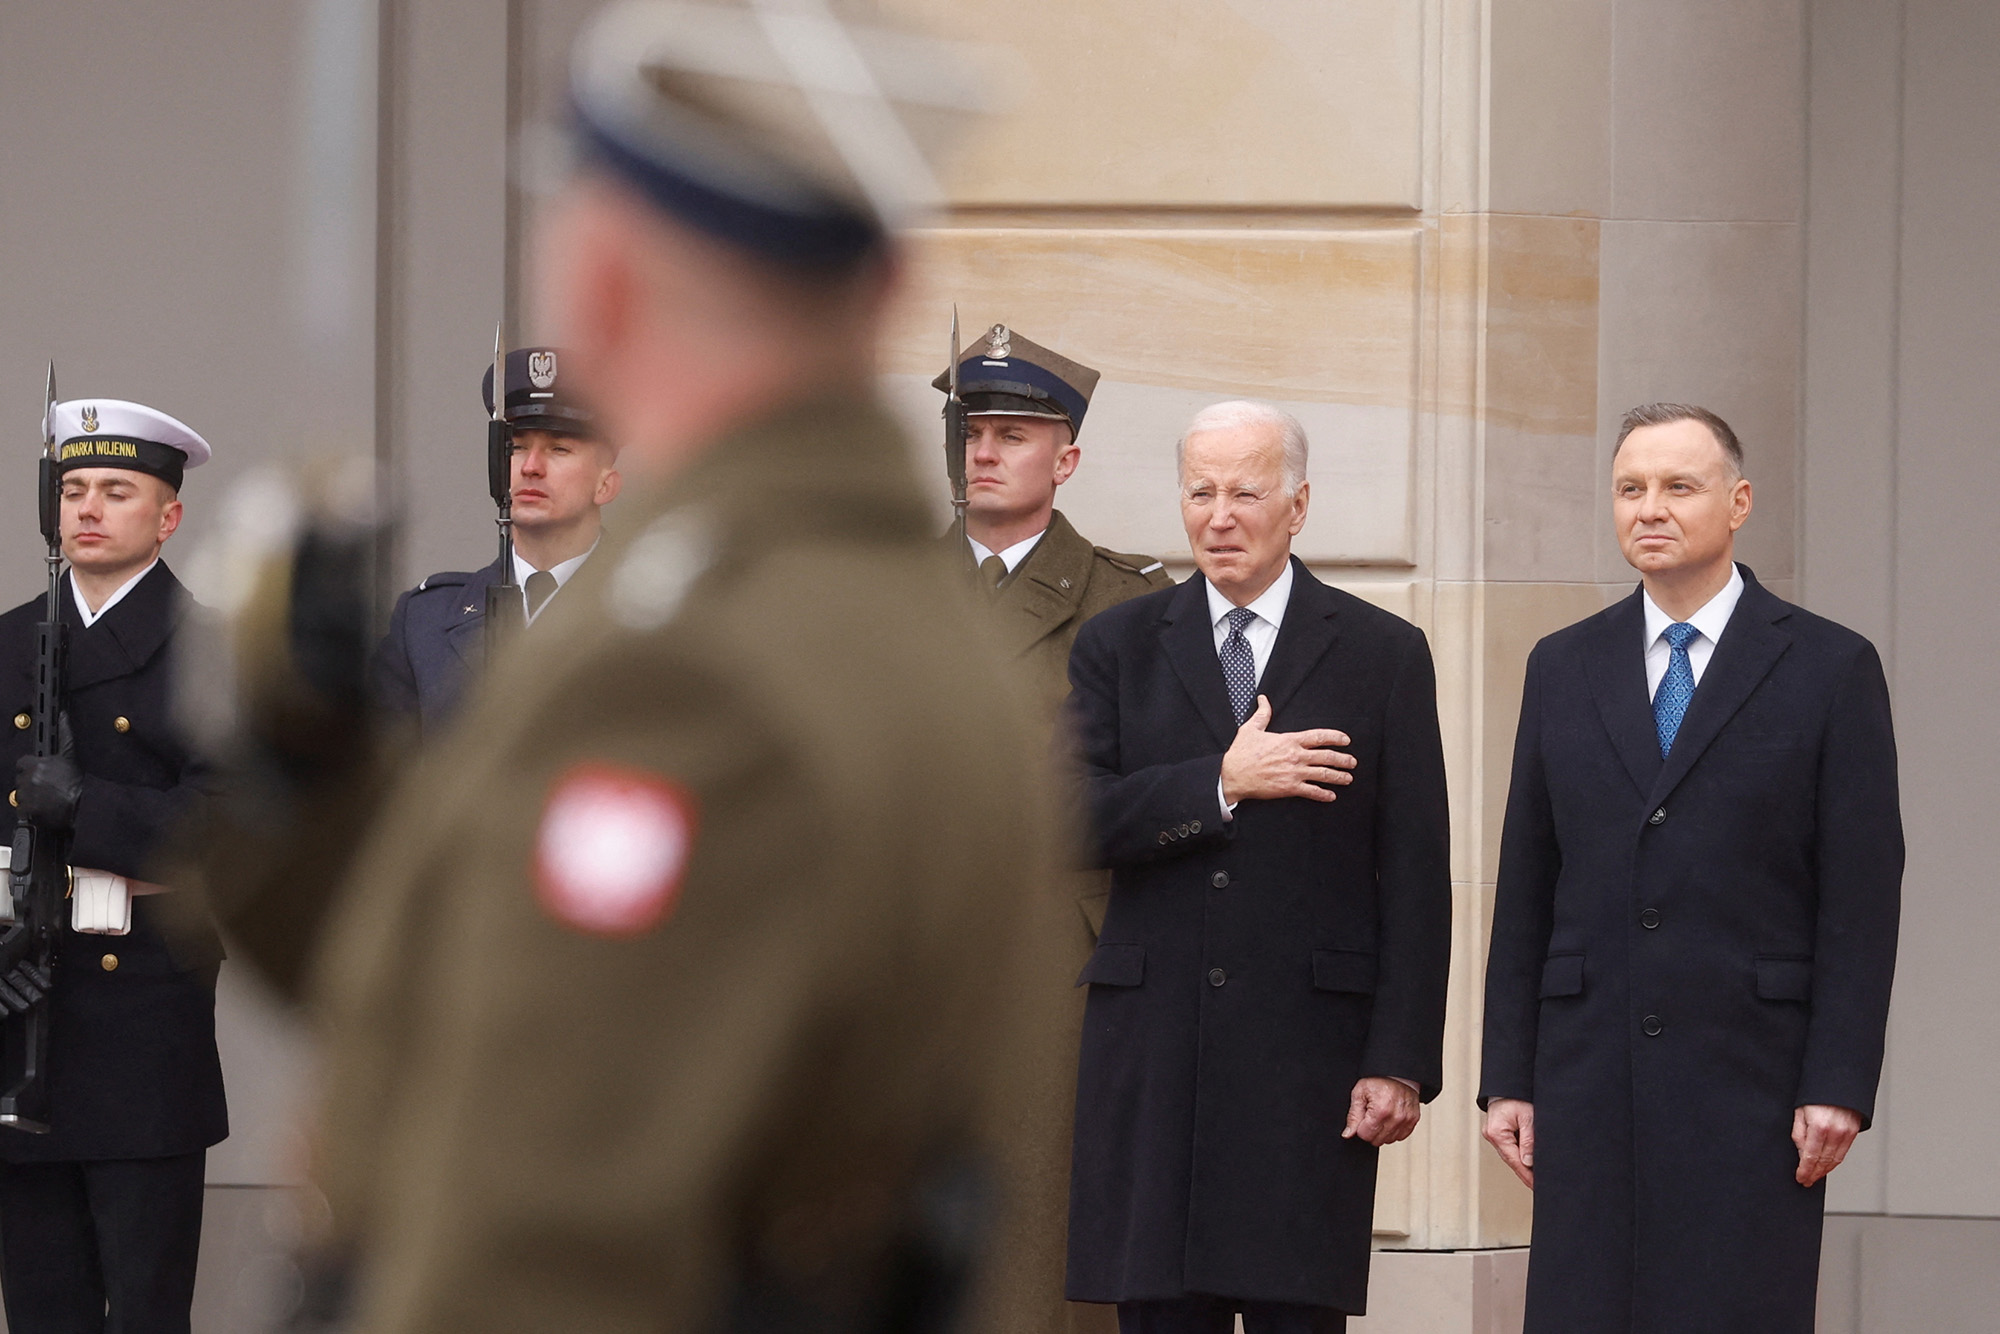 U.S. President Joe Biden and Polish President Andrzej Duda listen to national anthem during a welcome ceremony outside the Presidential Palace in Warsaw, Poland, on February 21.